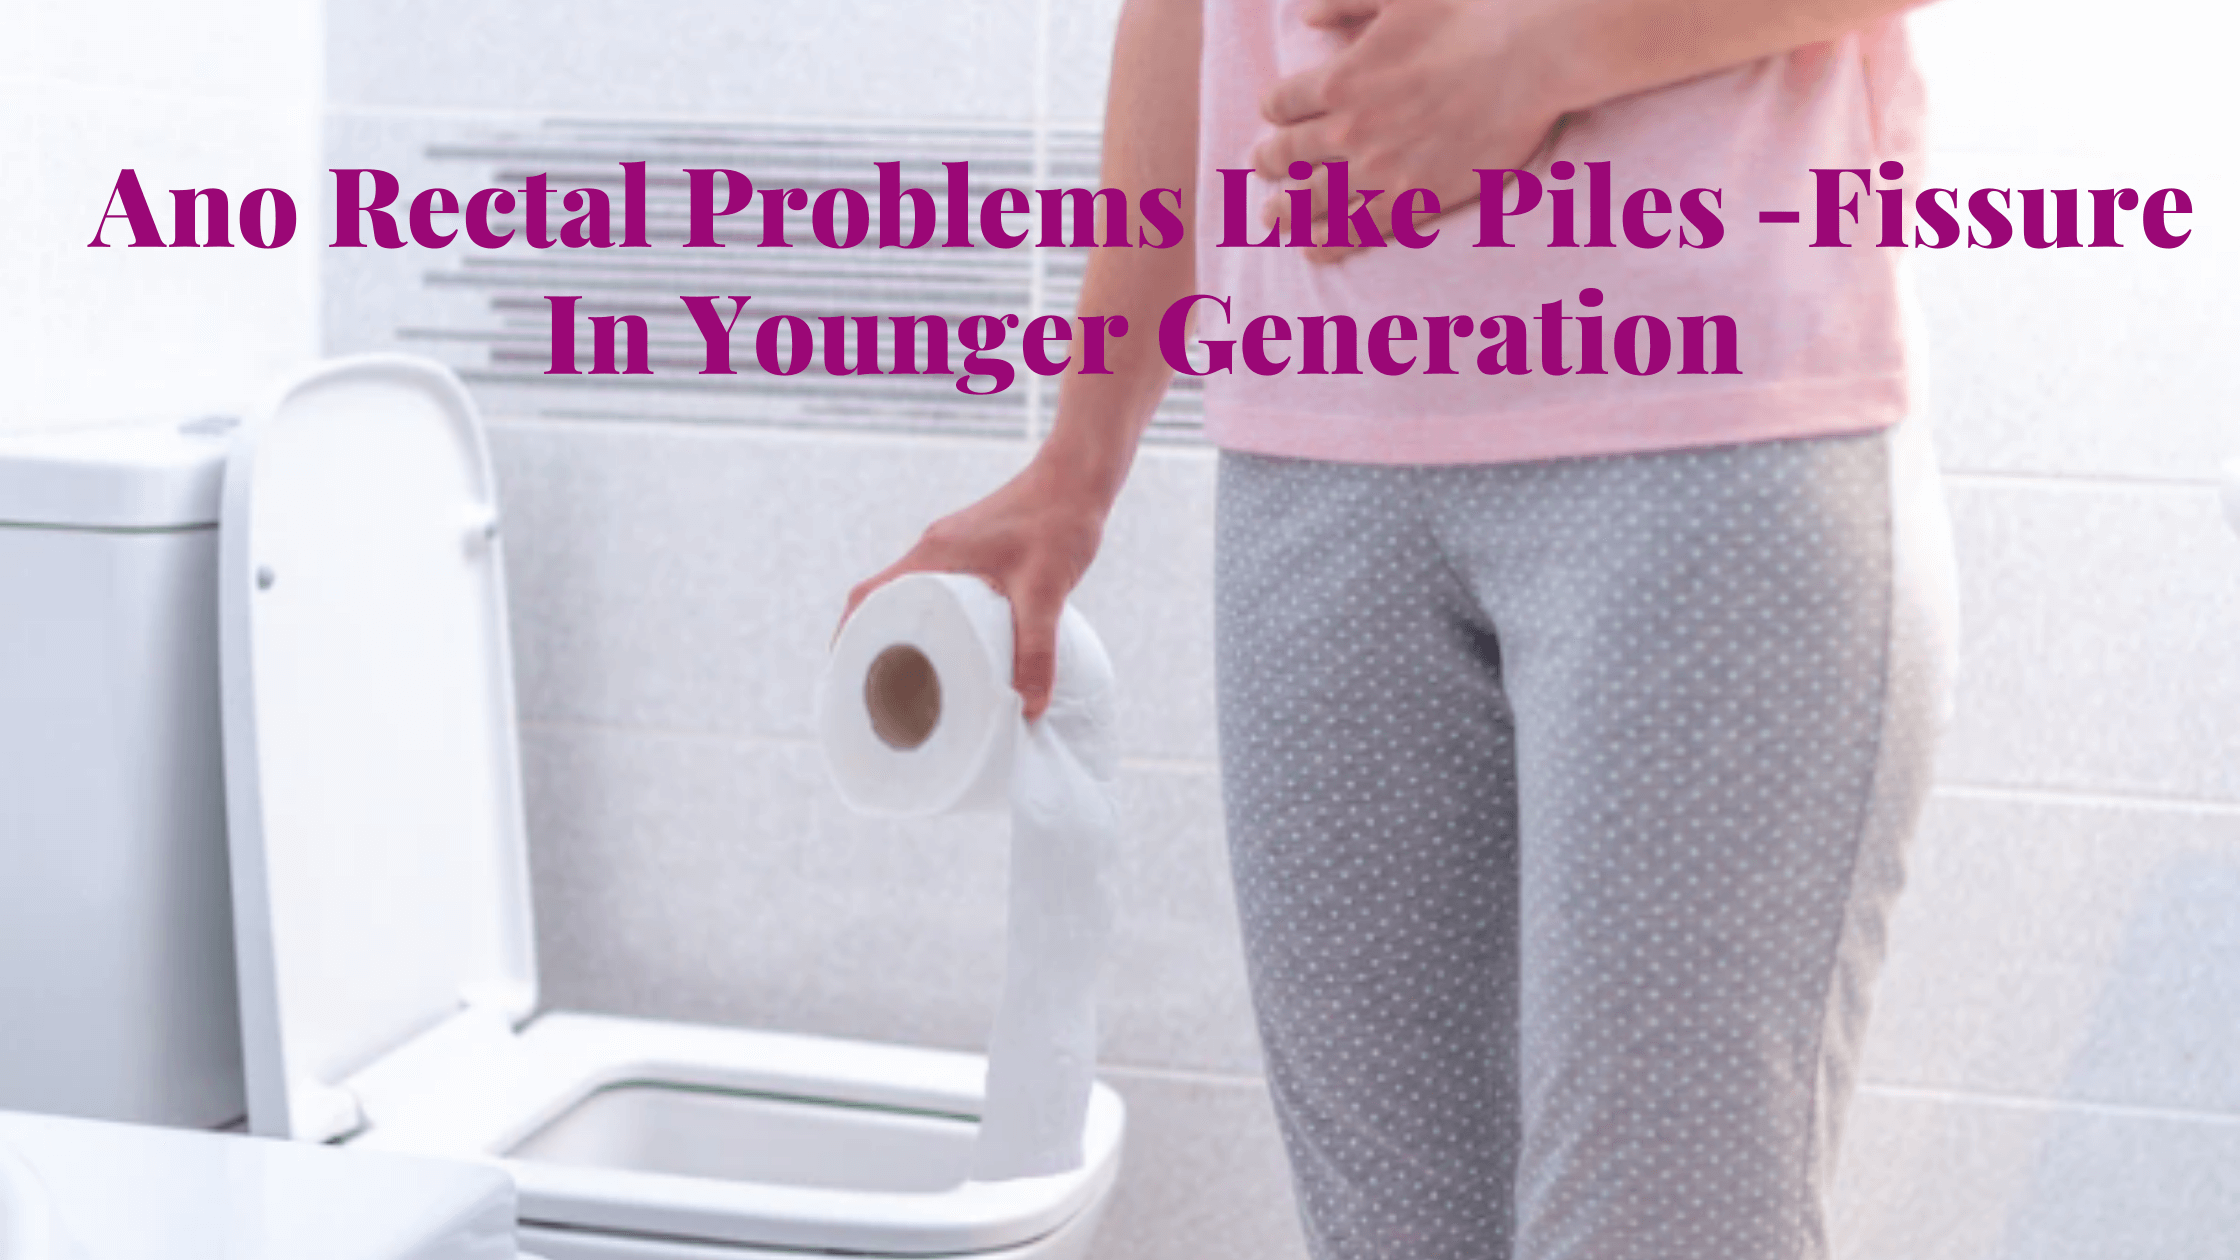 You are currently viewing Ano Rectal Problems Like Piles / Fissure In Younger Generation